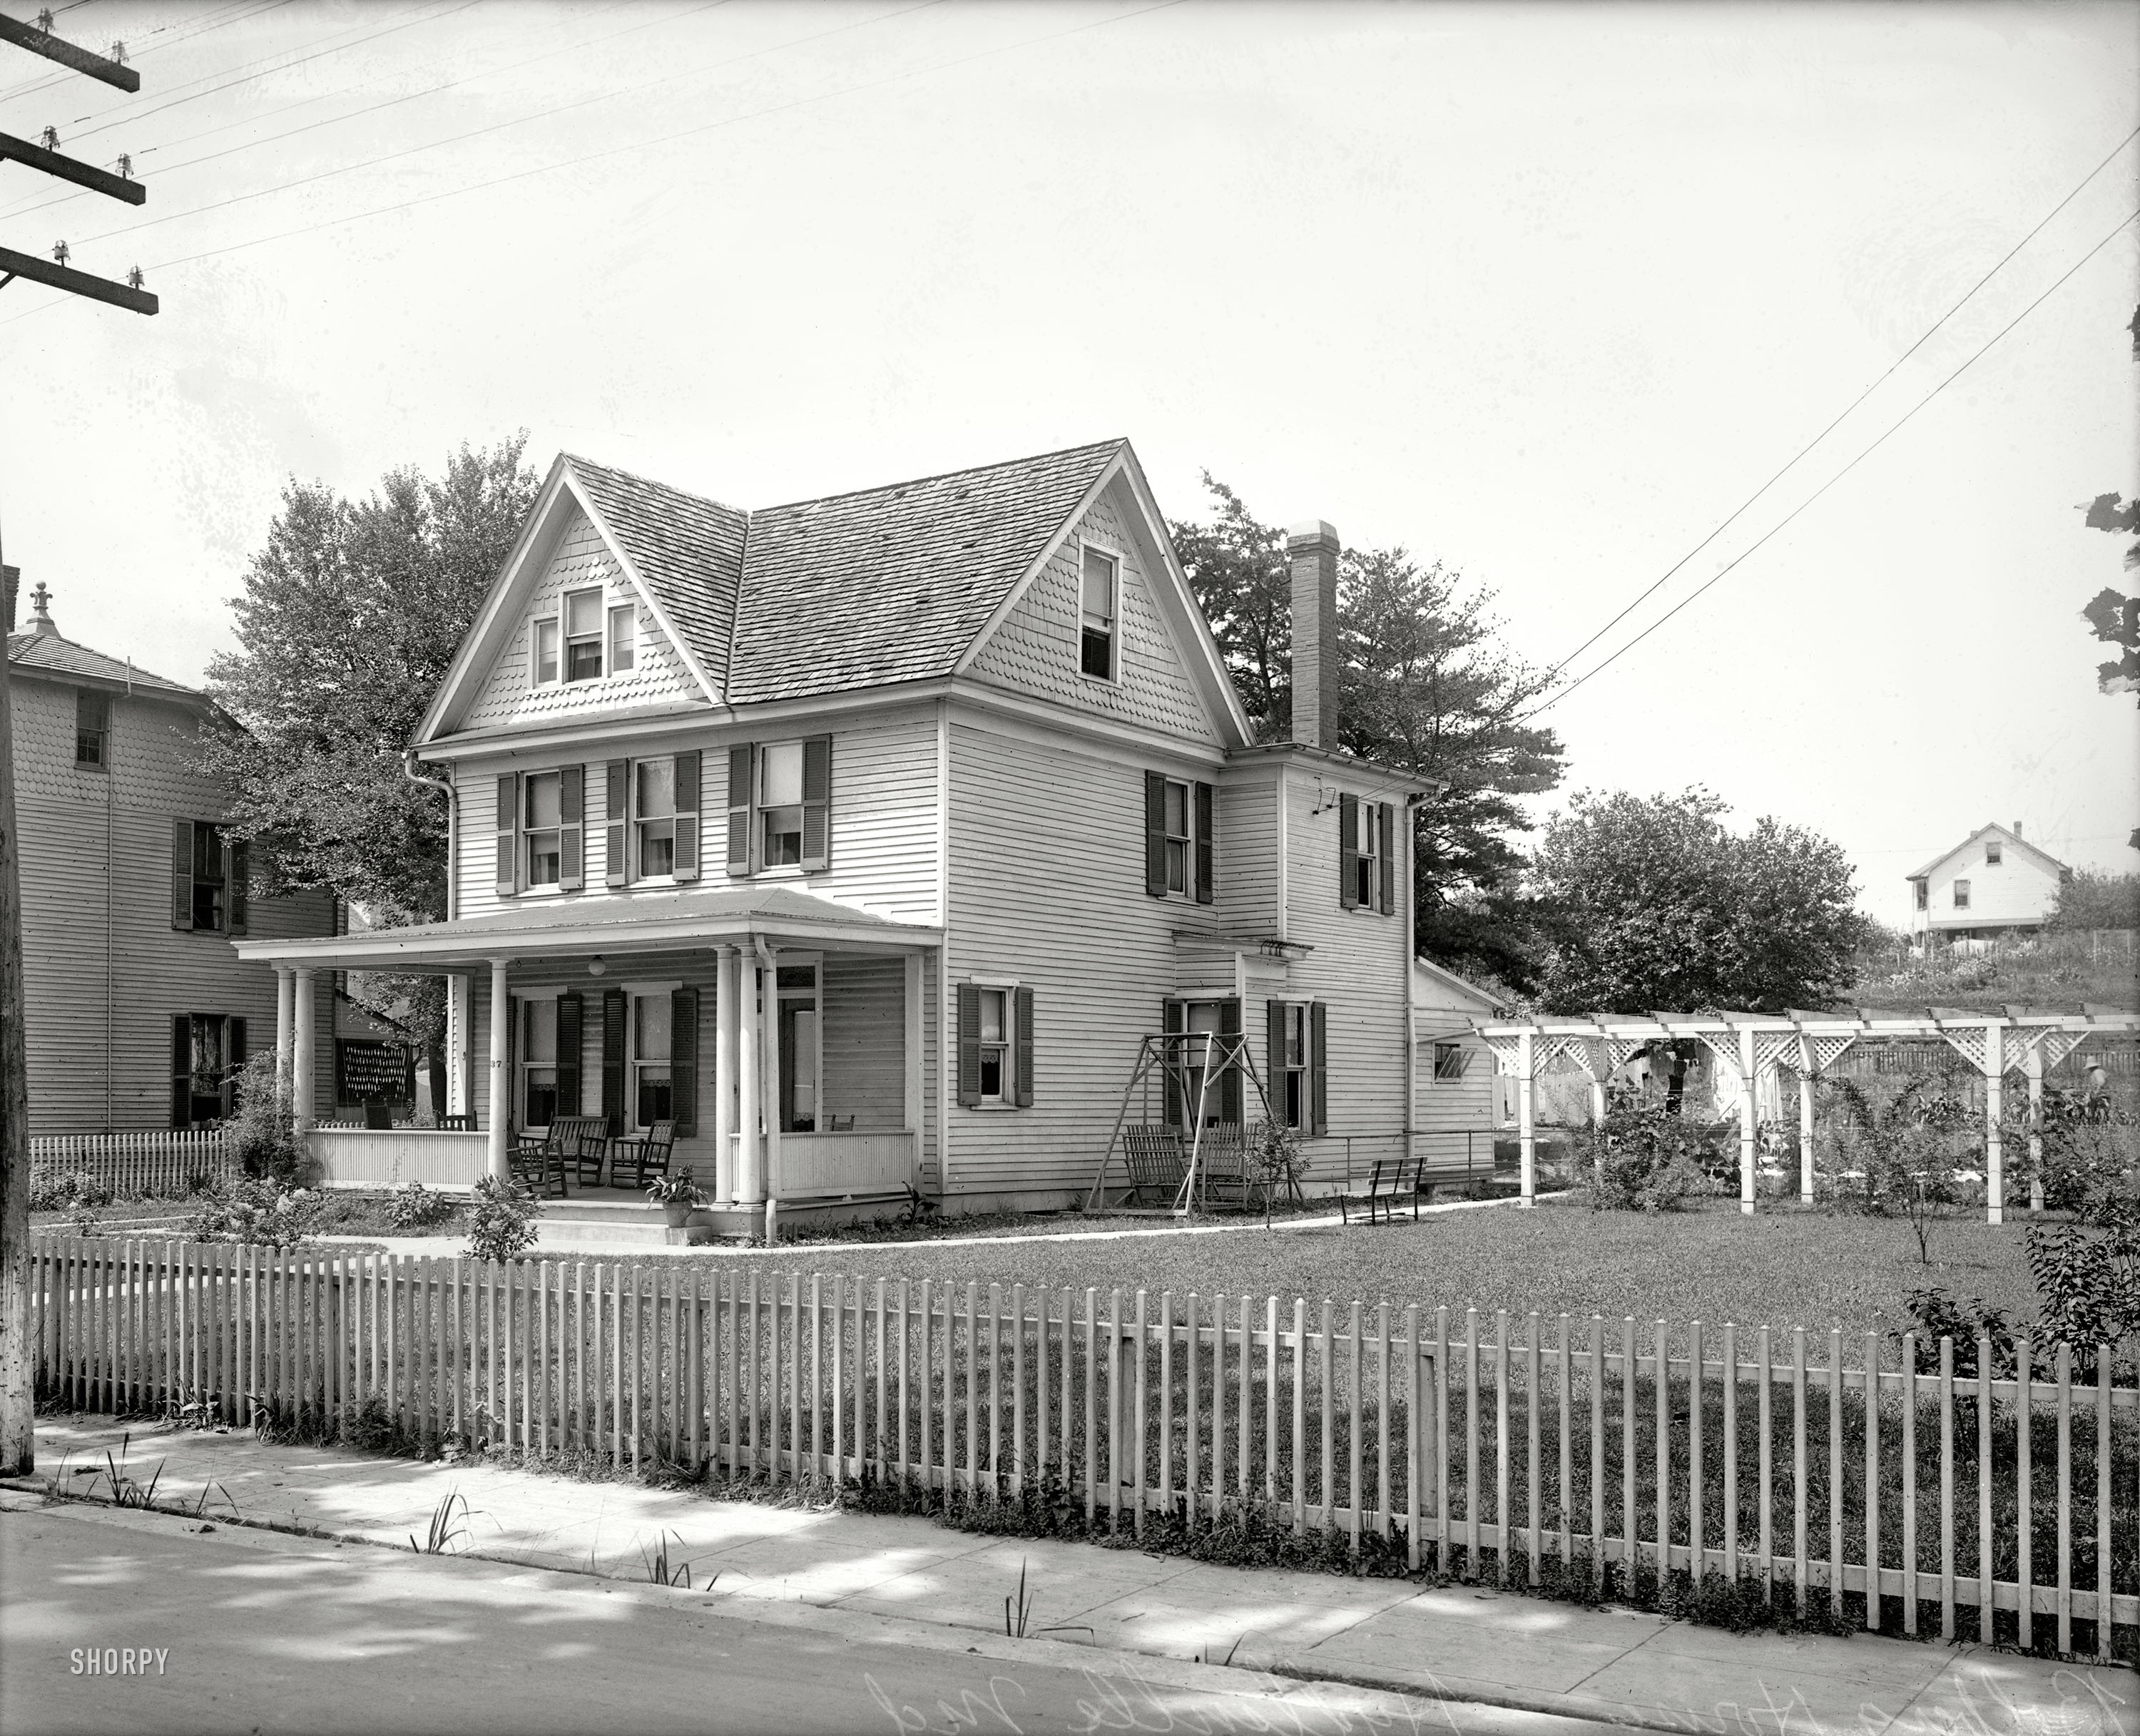 Prince George's County, Maryland, circa 1921. "Balberg house, Hyattsville." The address looks to be 137. Bonus points if you can find the street. View full size.